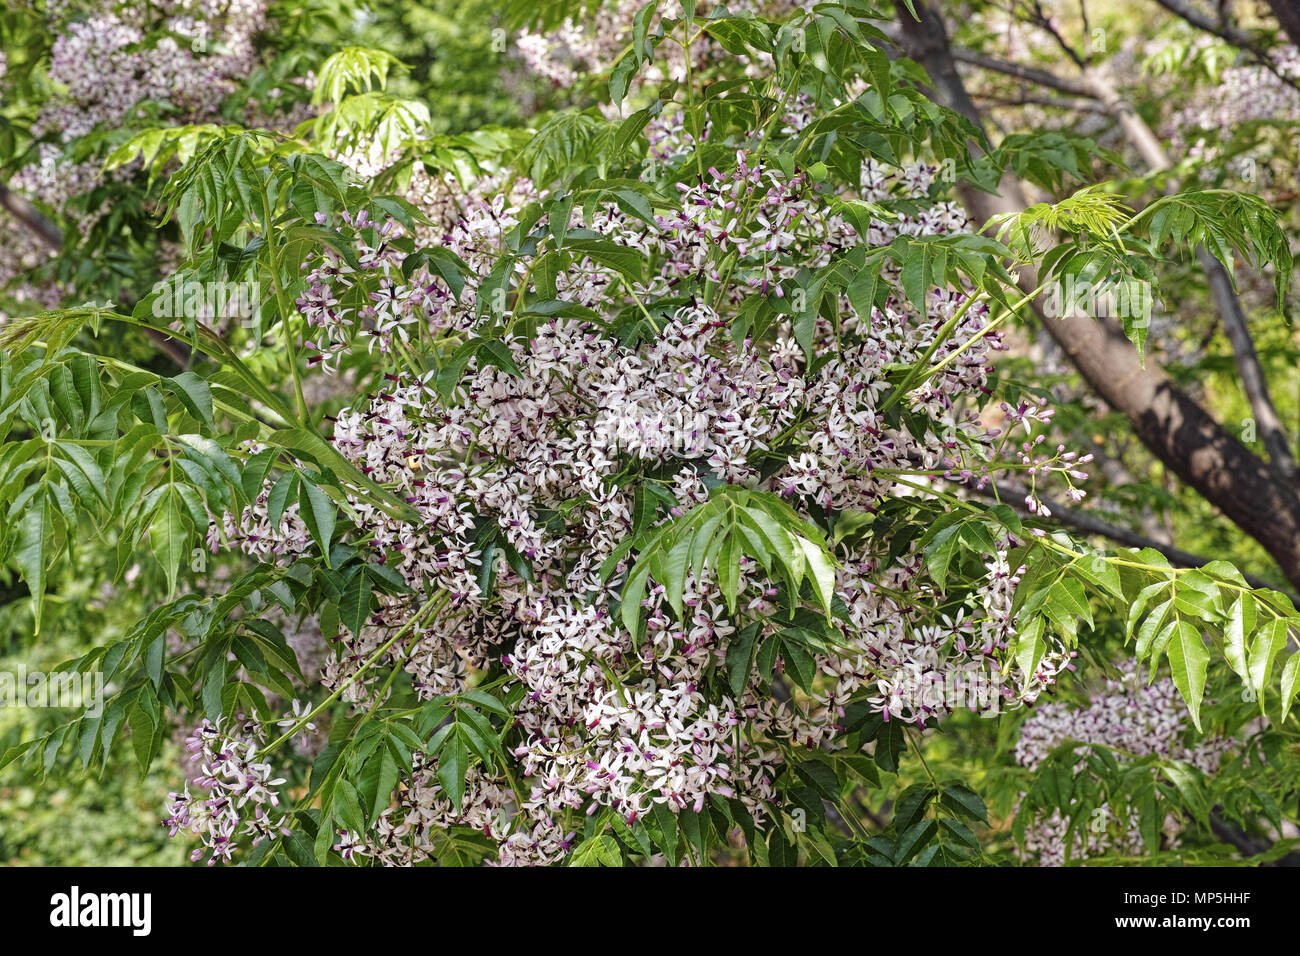 chinaberry tree in bloom, foliage and its cluster inflorescences Stock Photo